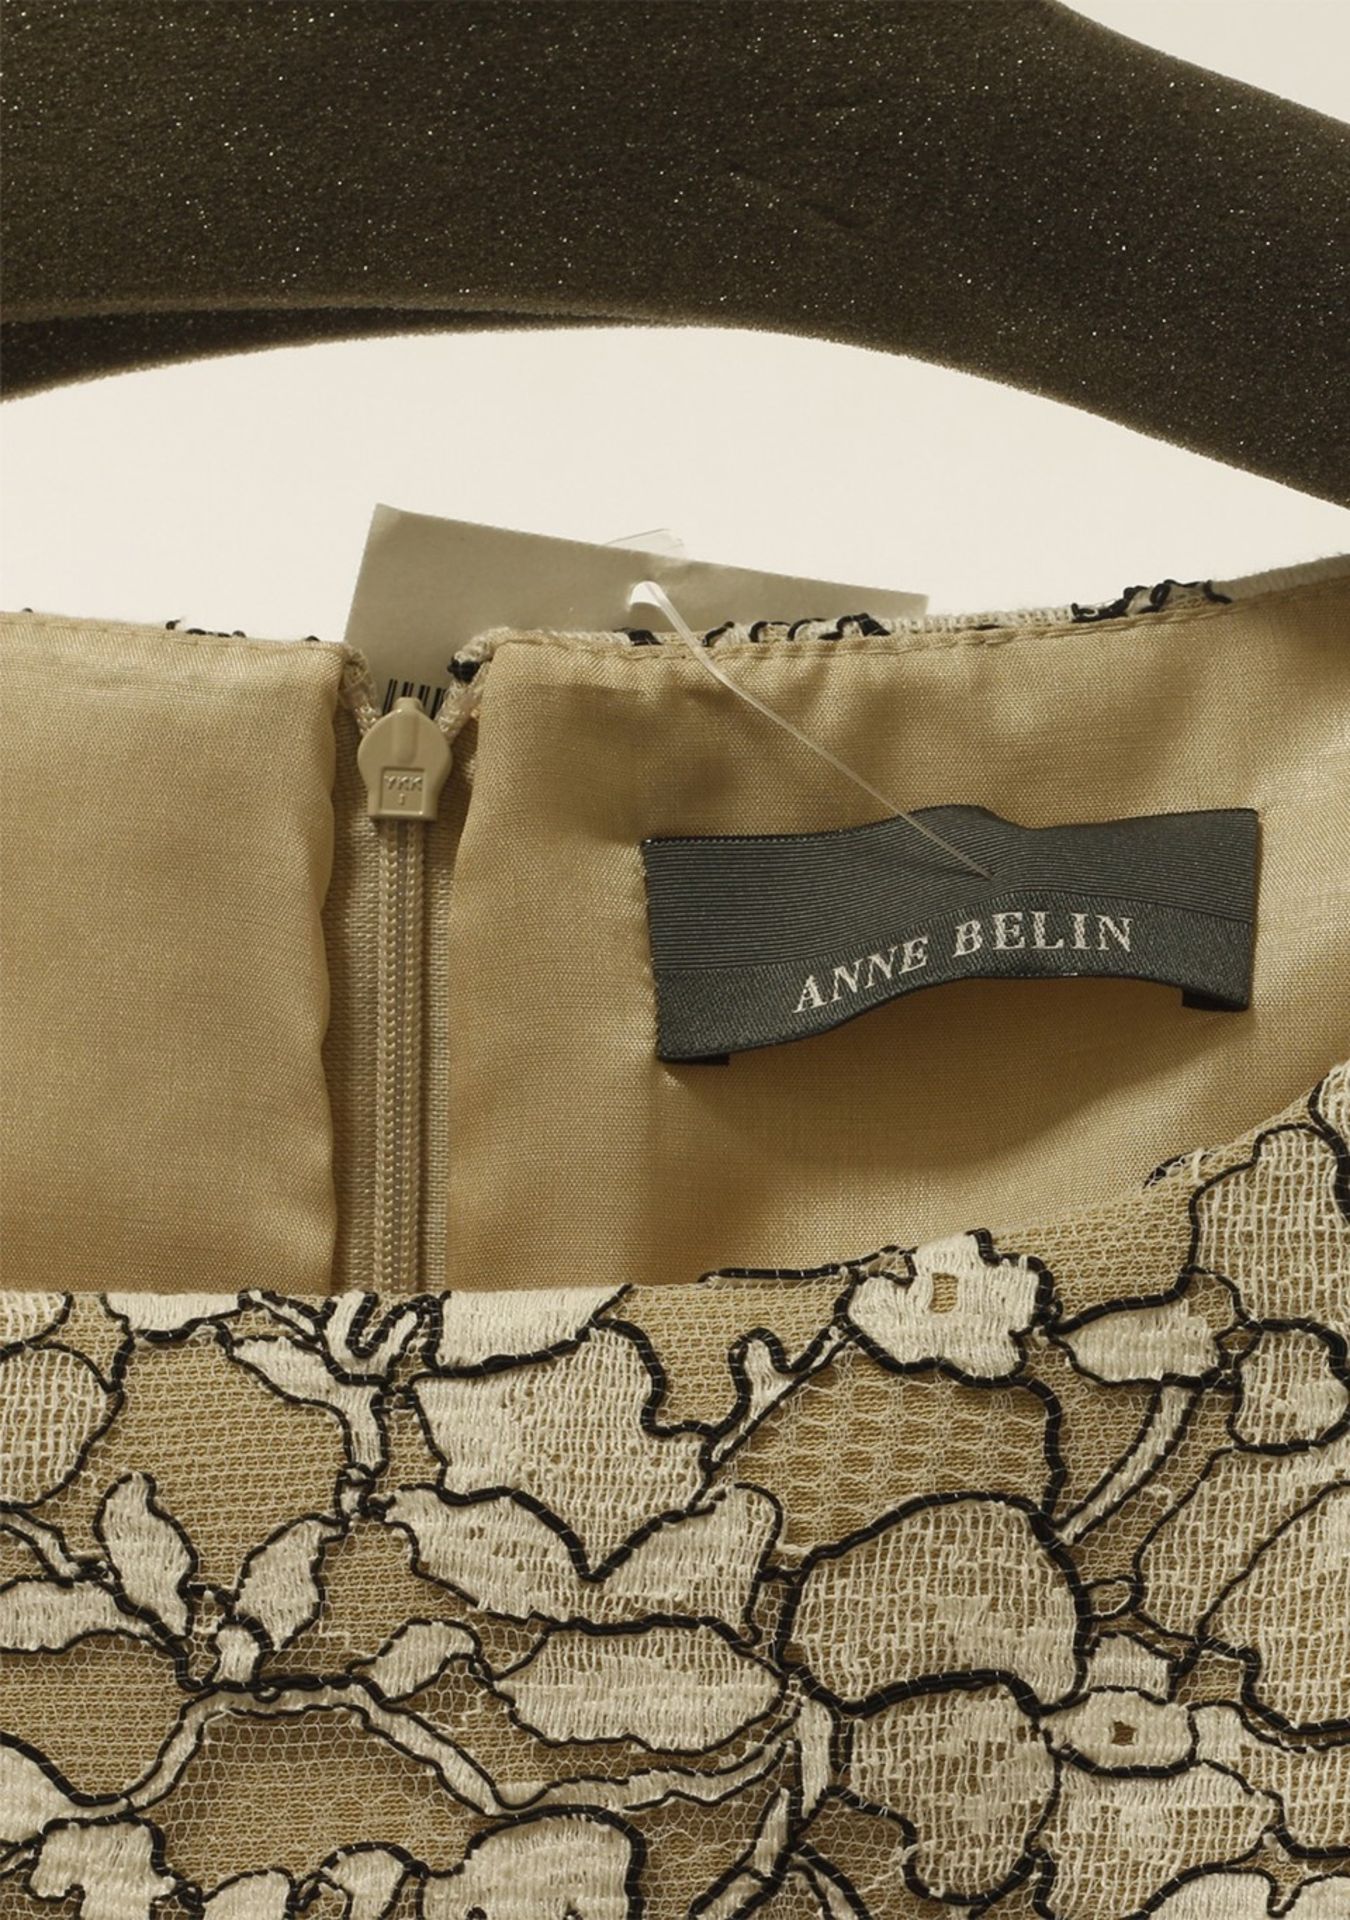 1 x Anne Belin Beige Dress - Size: 16 - Material: 100% Polyester - From a High End Clothing Boutique - Image 3 of 9